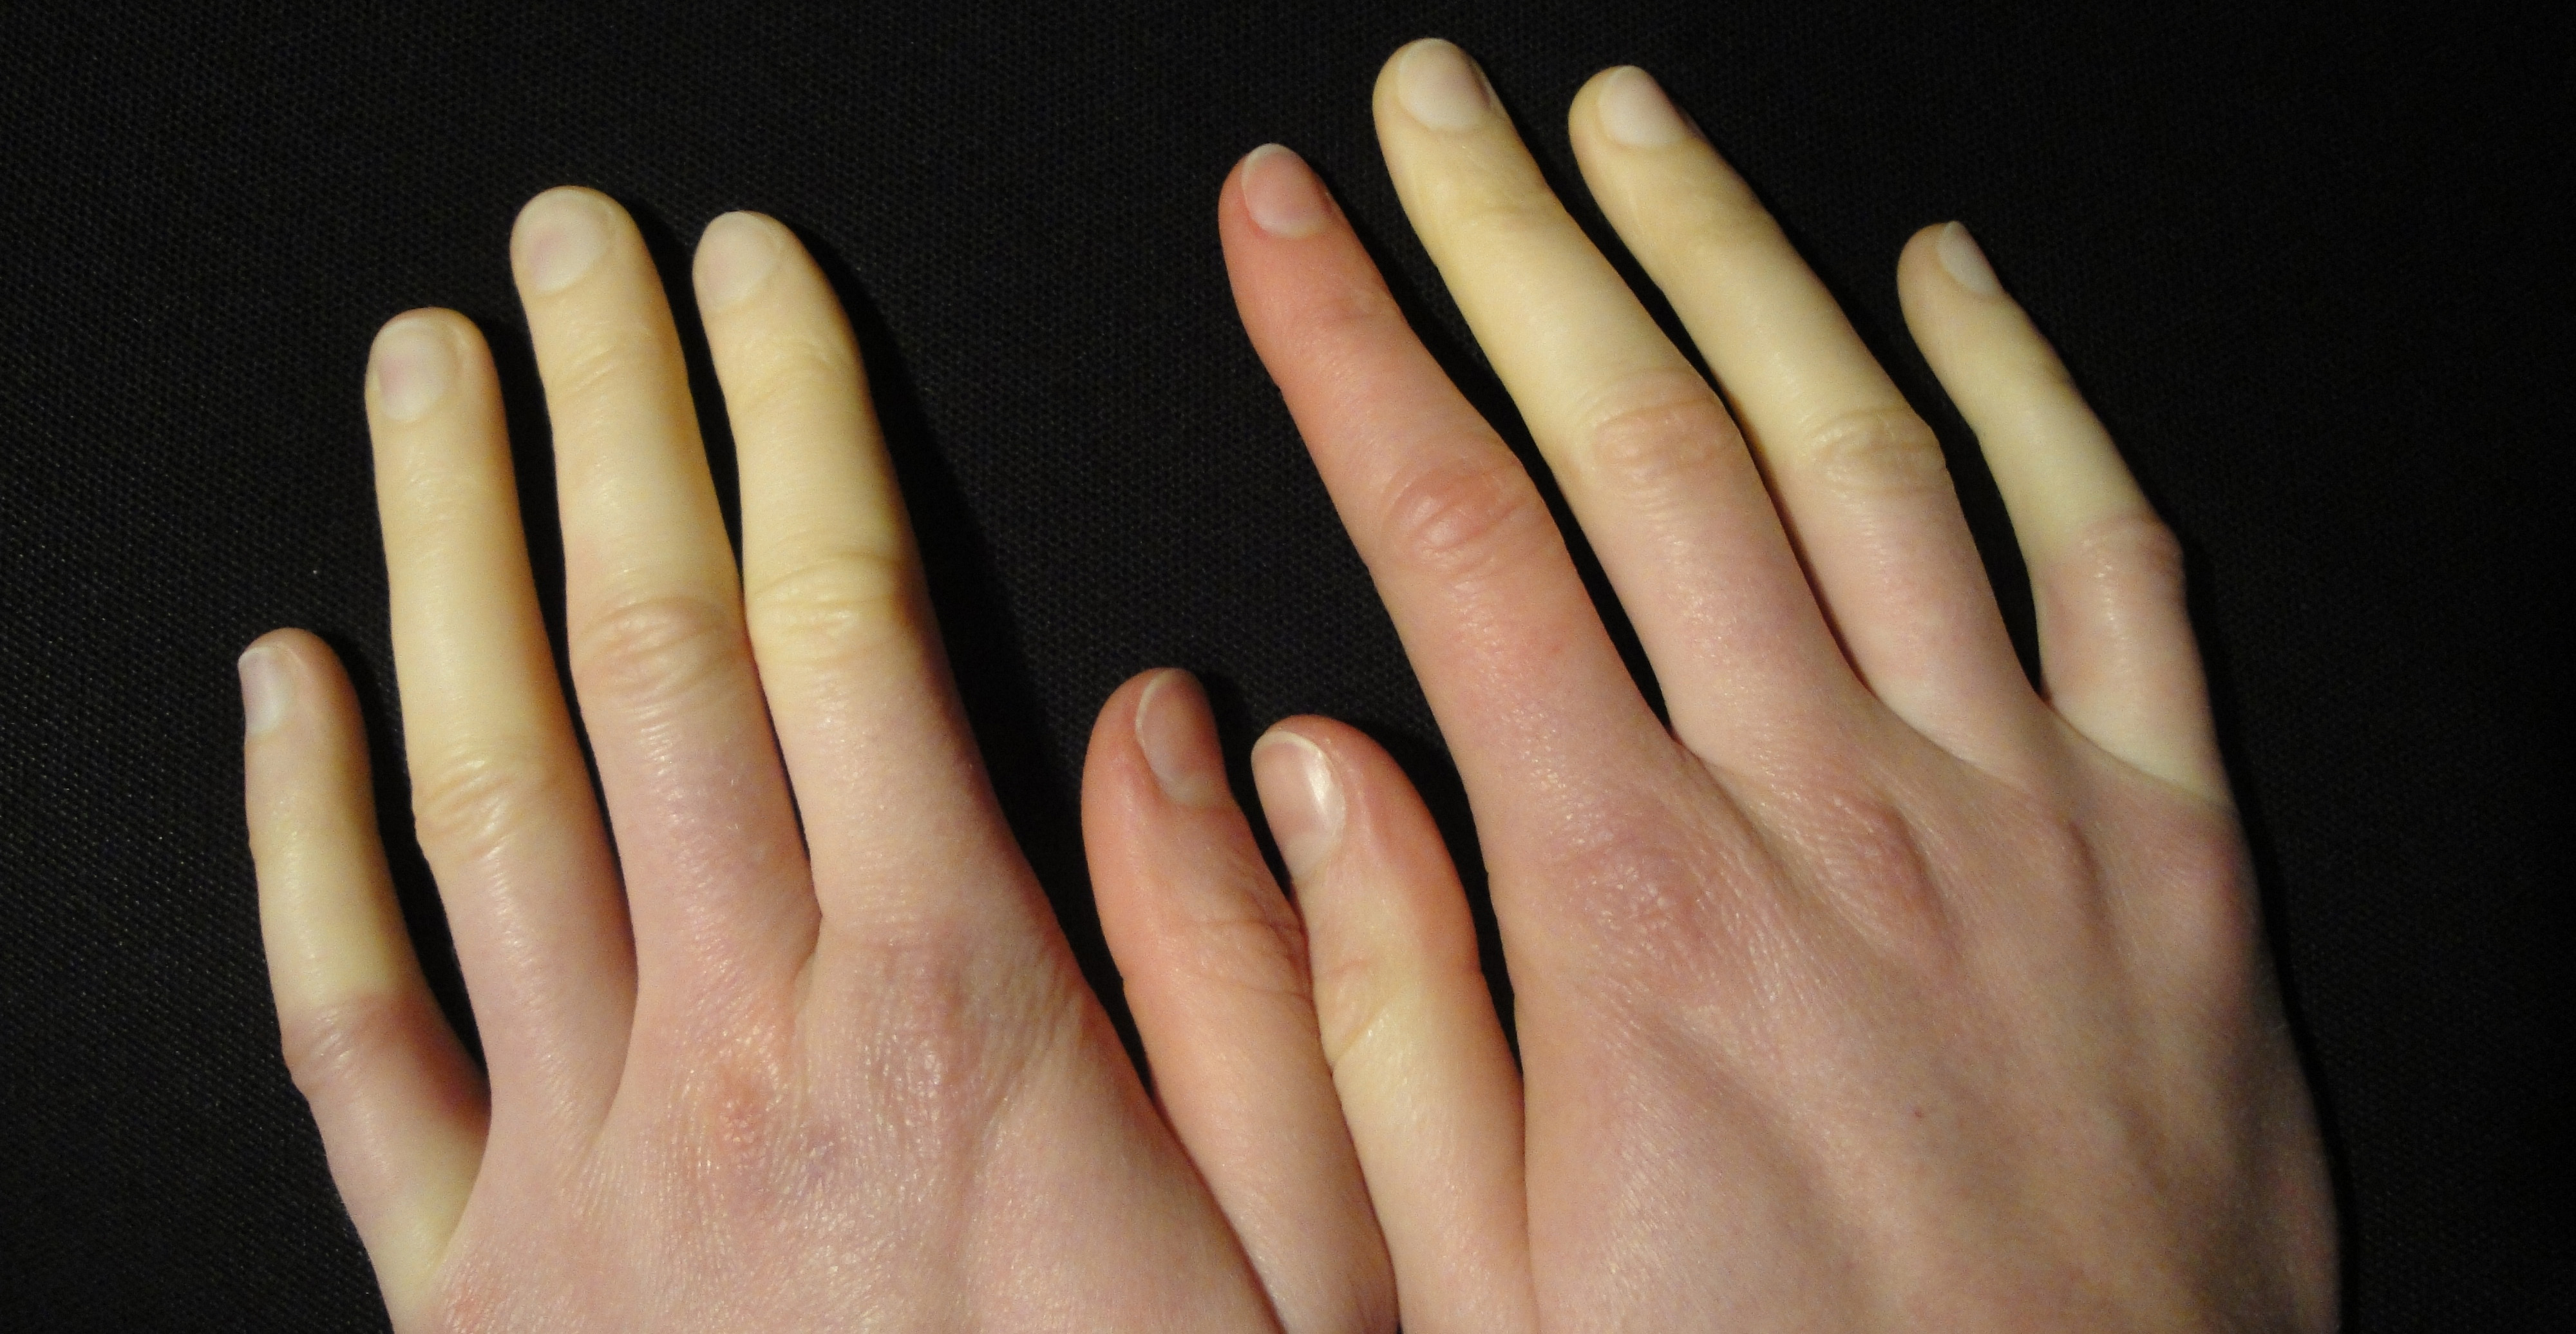 Clinical clues and treatments for Raynaud’s • The Medical Republic